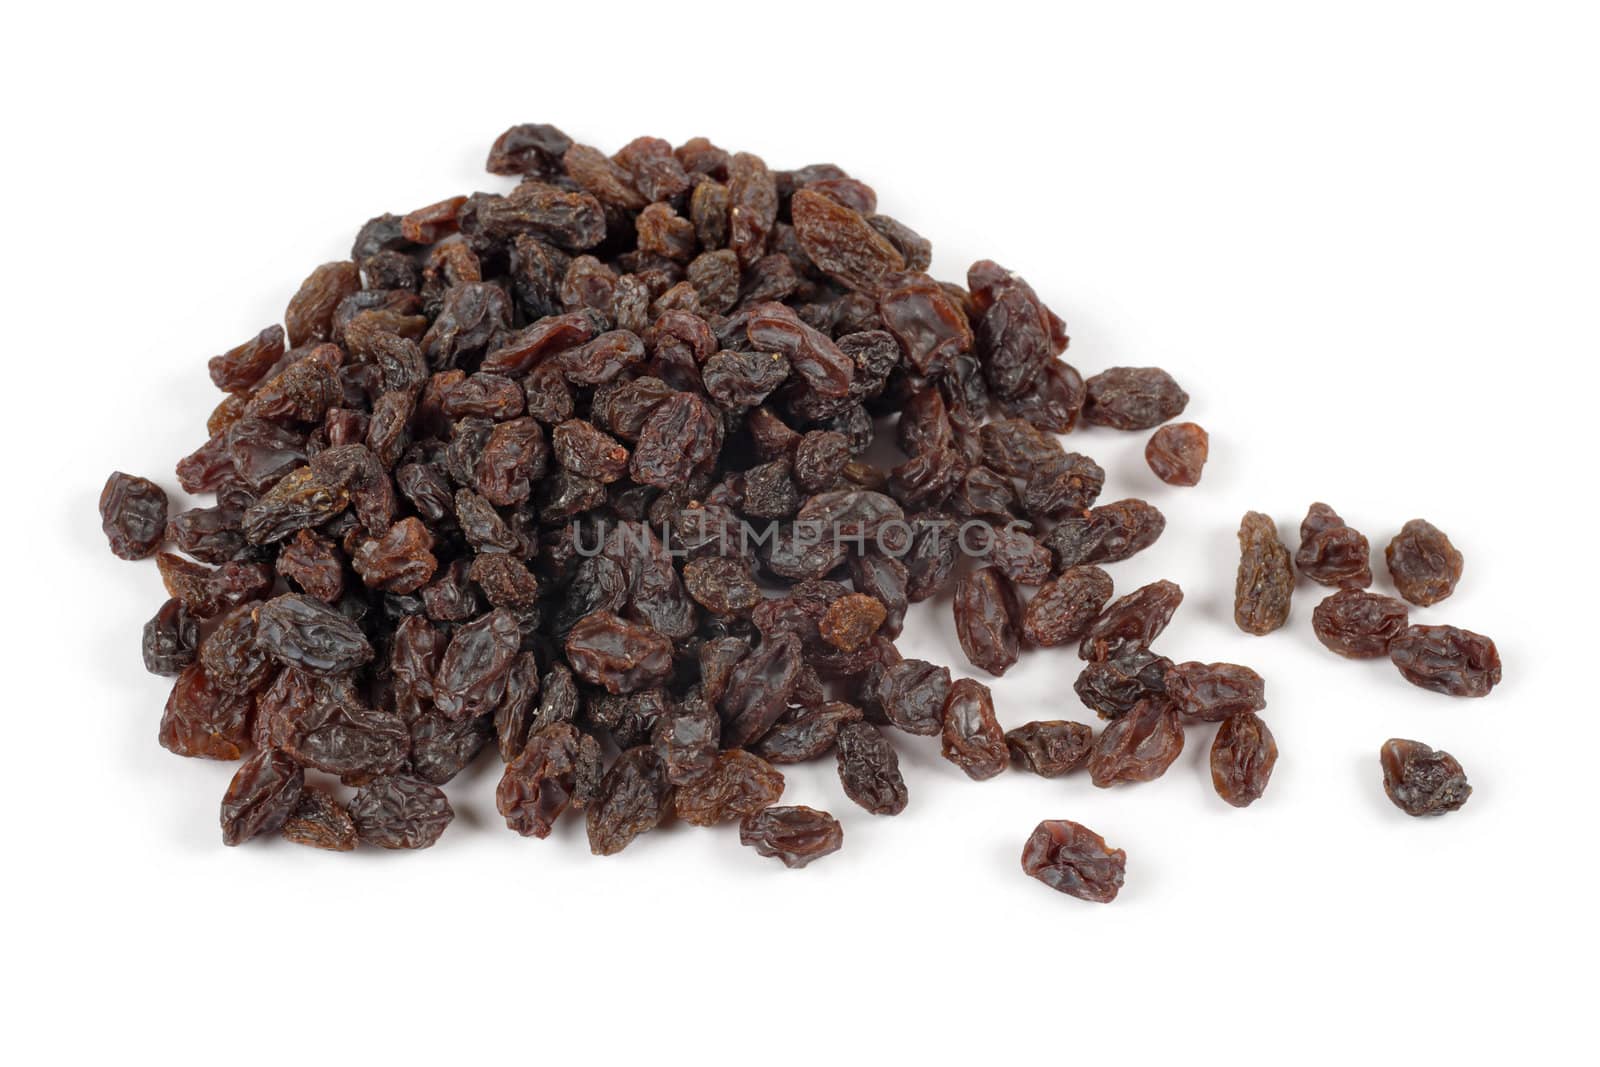 Photo of a pile of raisins on a white background.